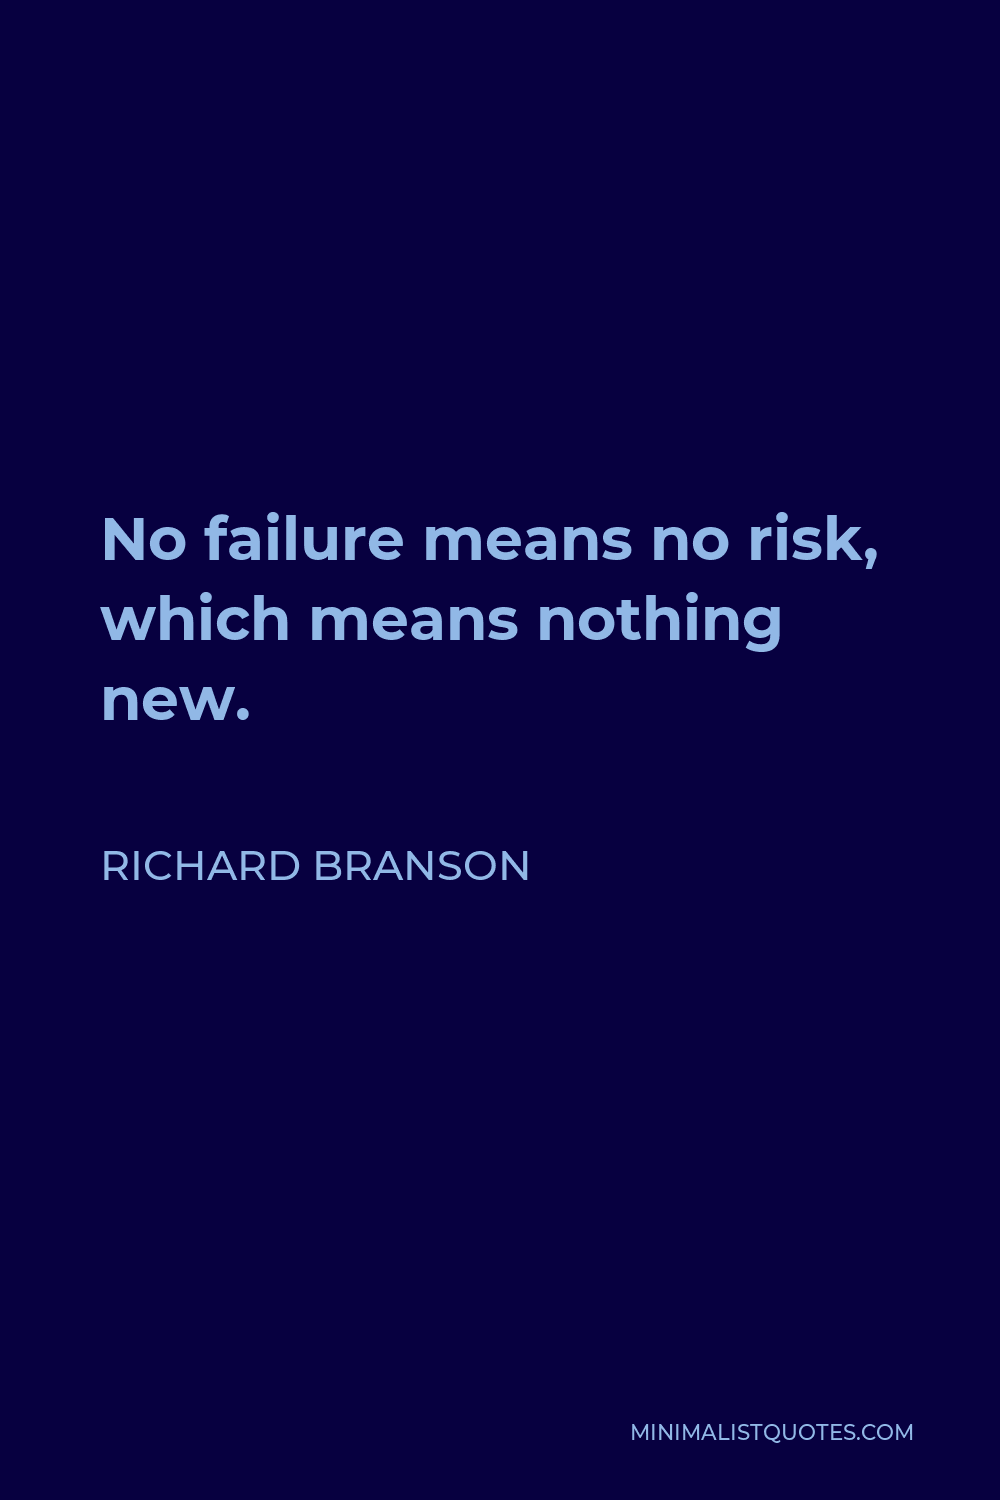 Richard Branson Quote - No failure means no risk, which means nothing new.